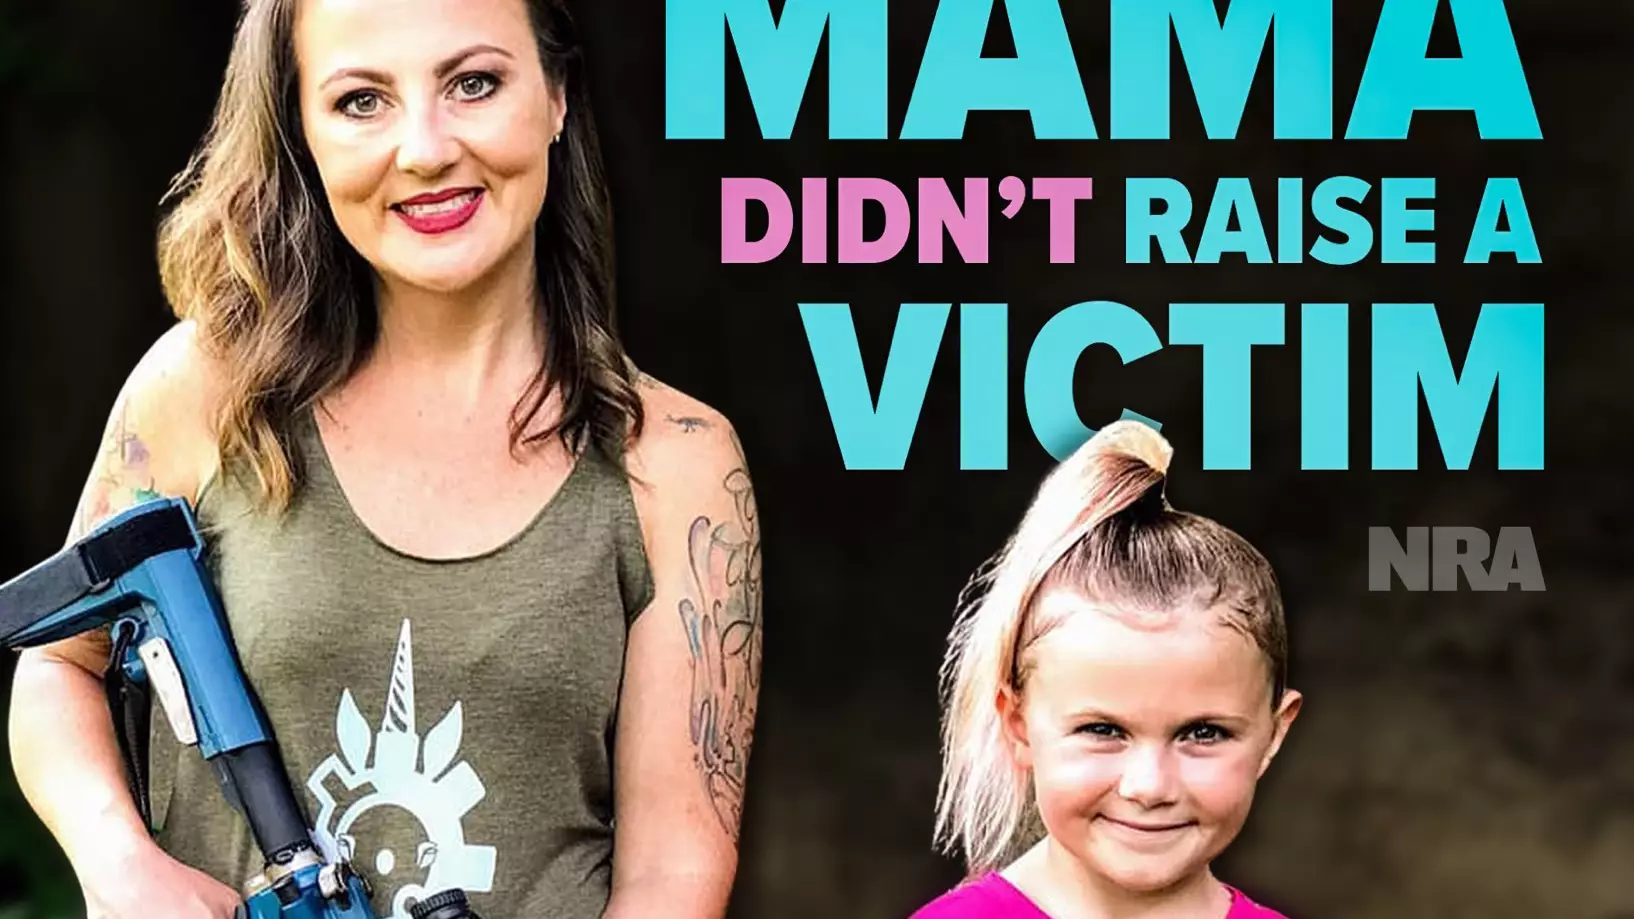 The NRA Has Been Called Out For Its Confronting Mother's Day Post